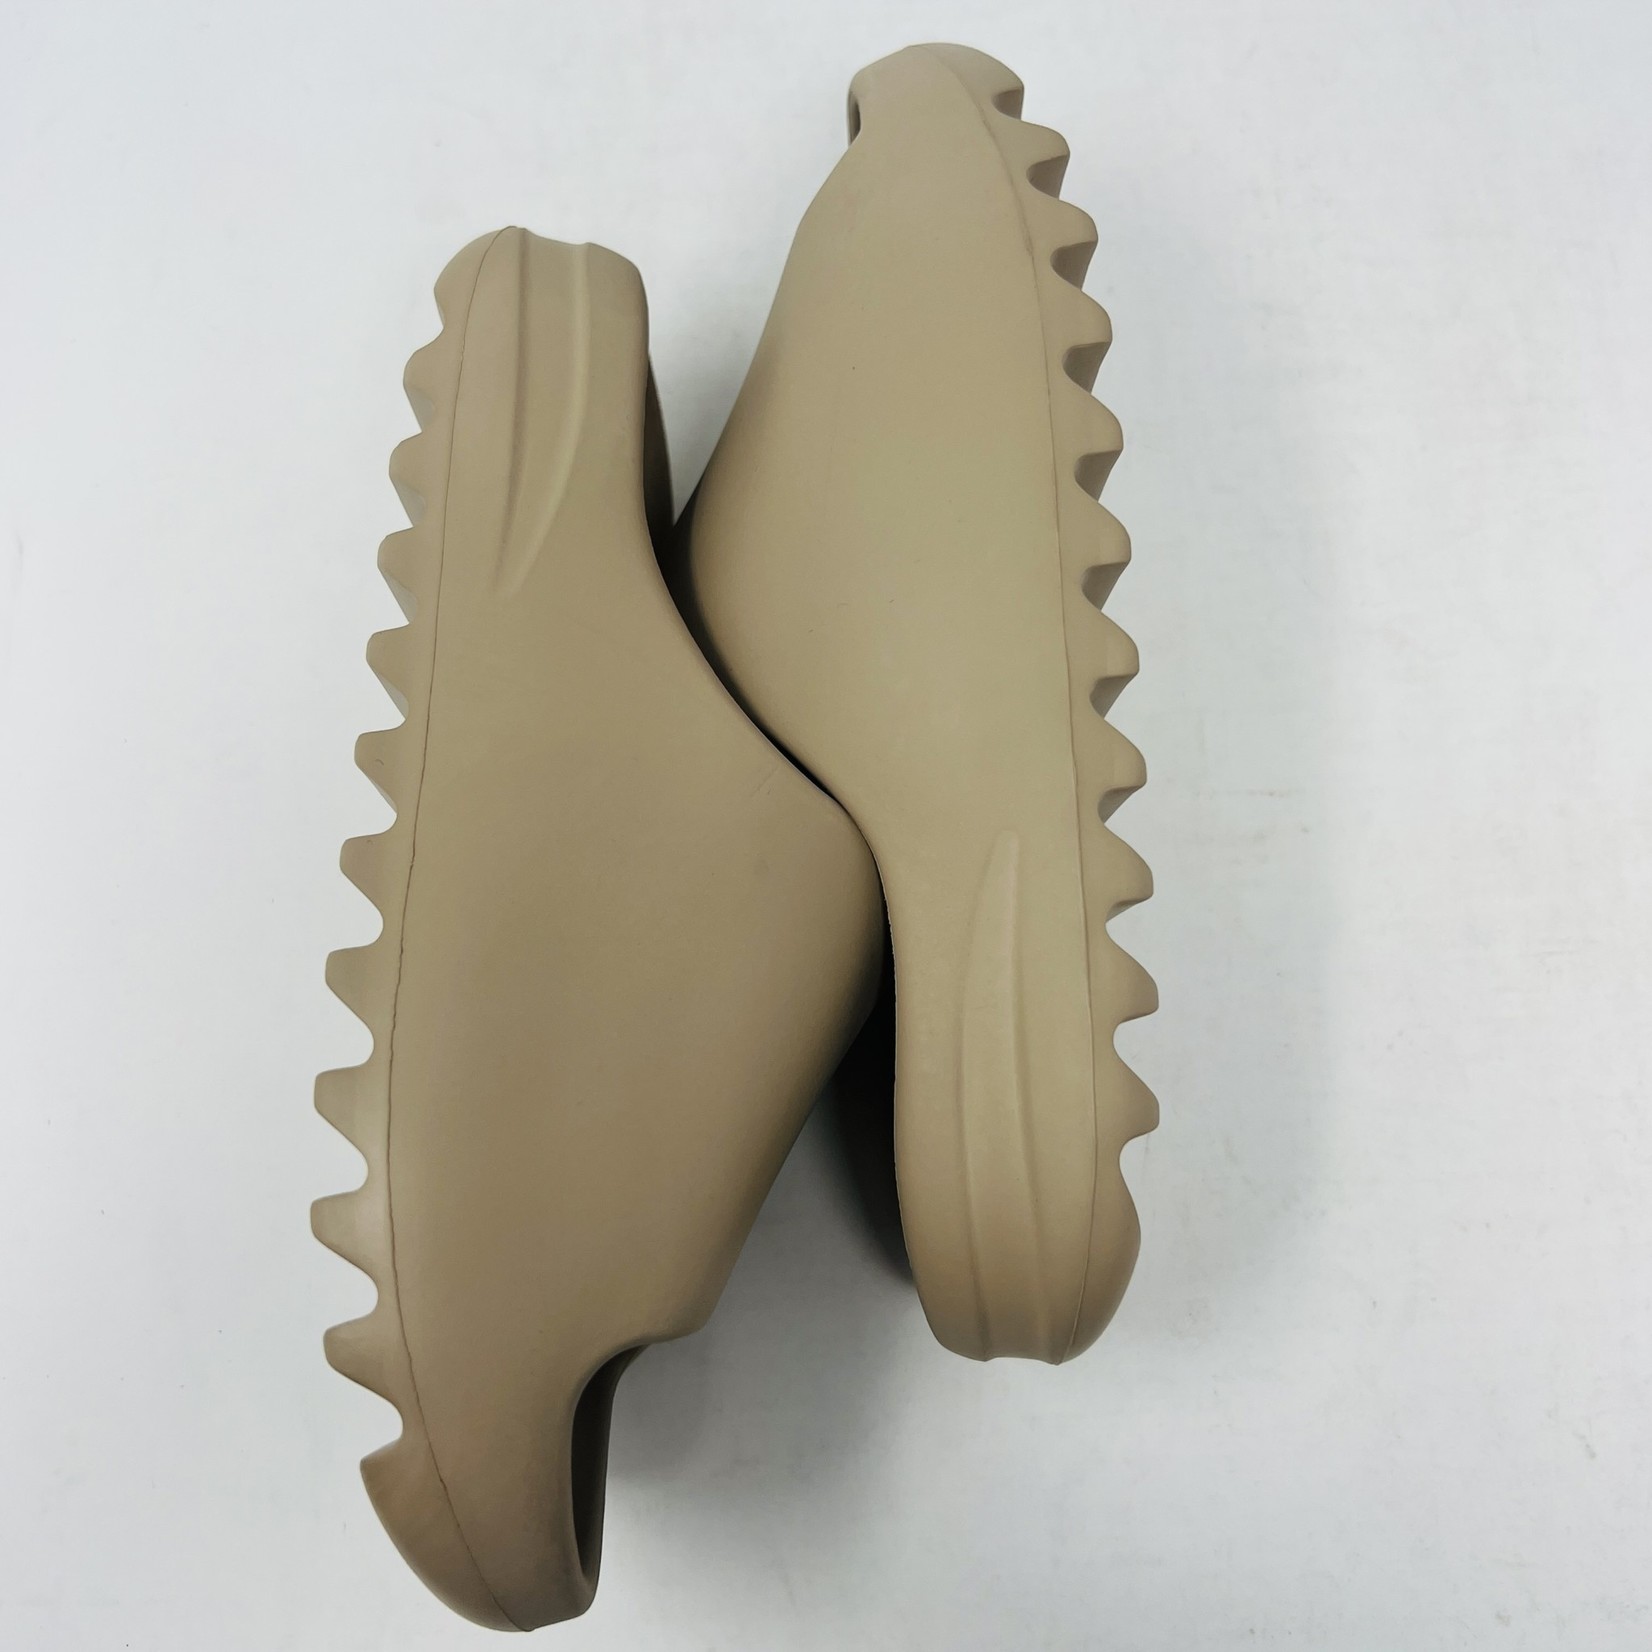 Yeezy adidas Yeezy Slide Pure (First Release)